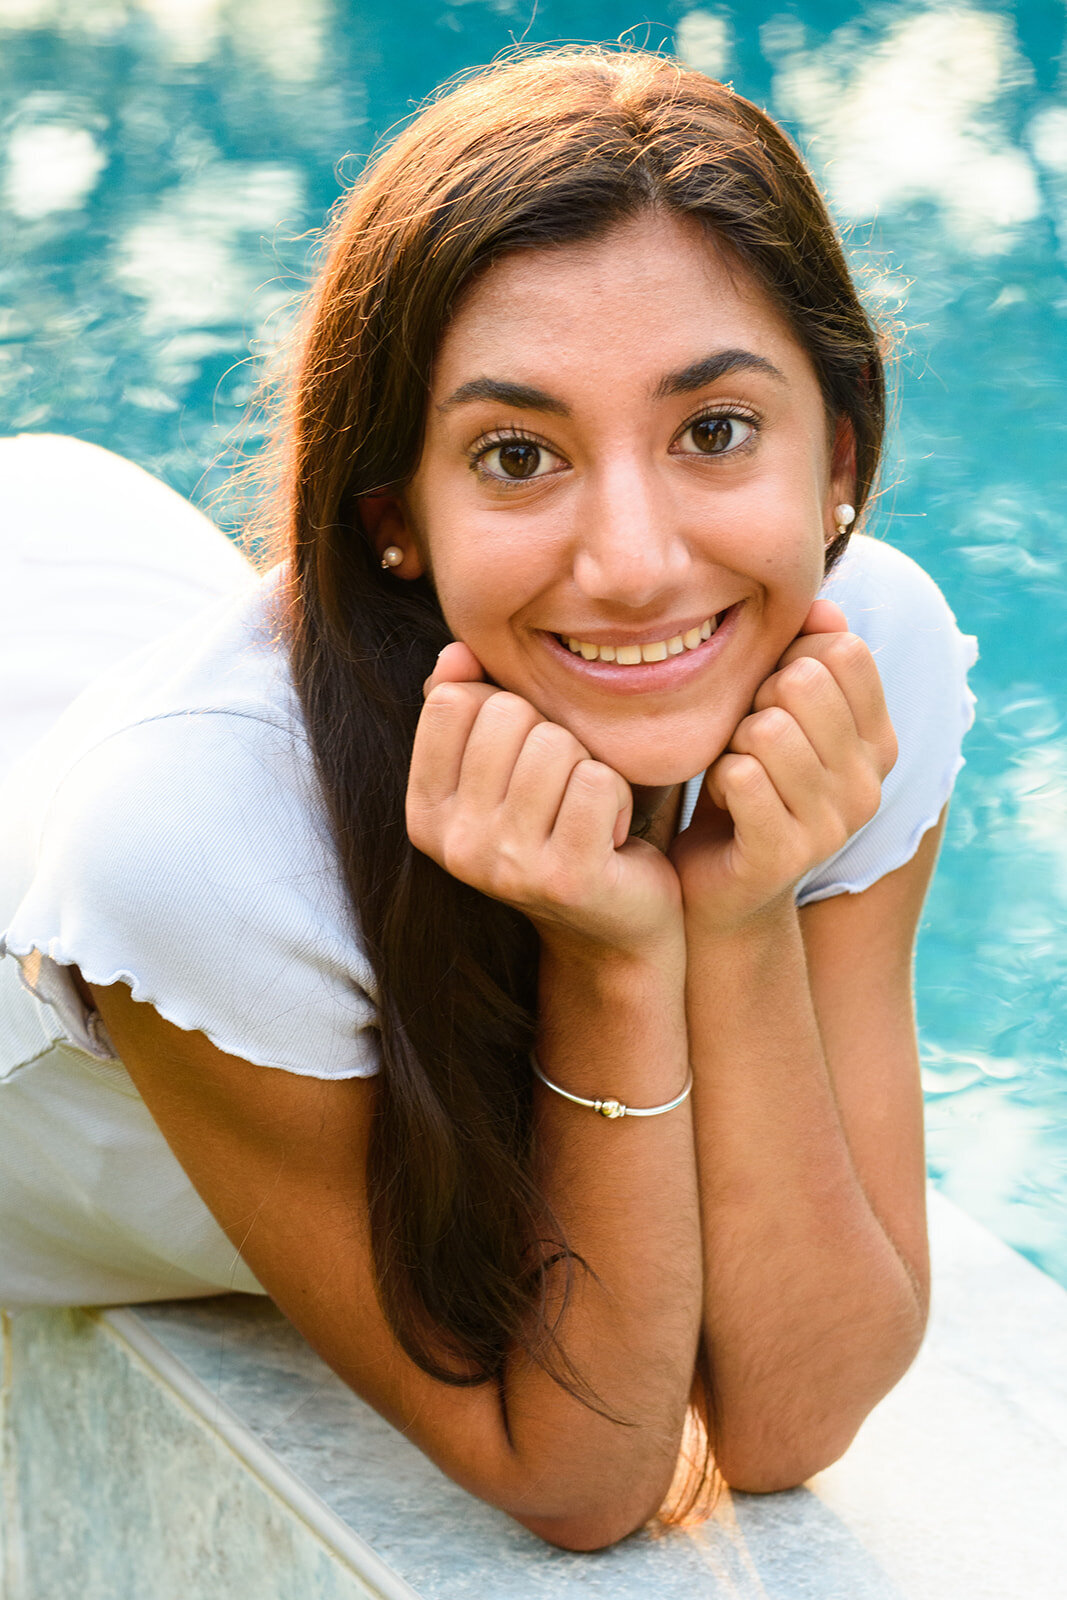 girl close by pool